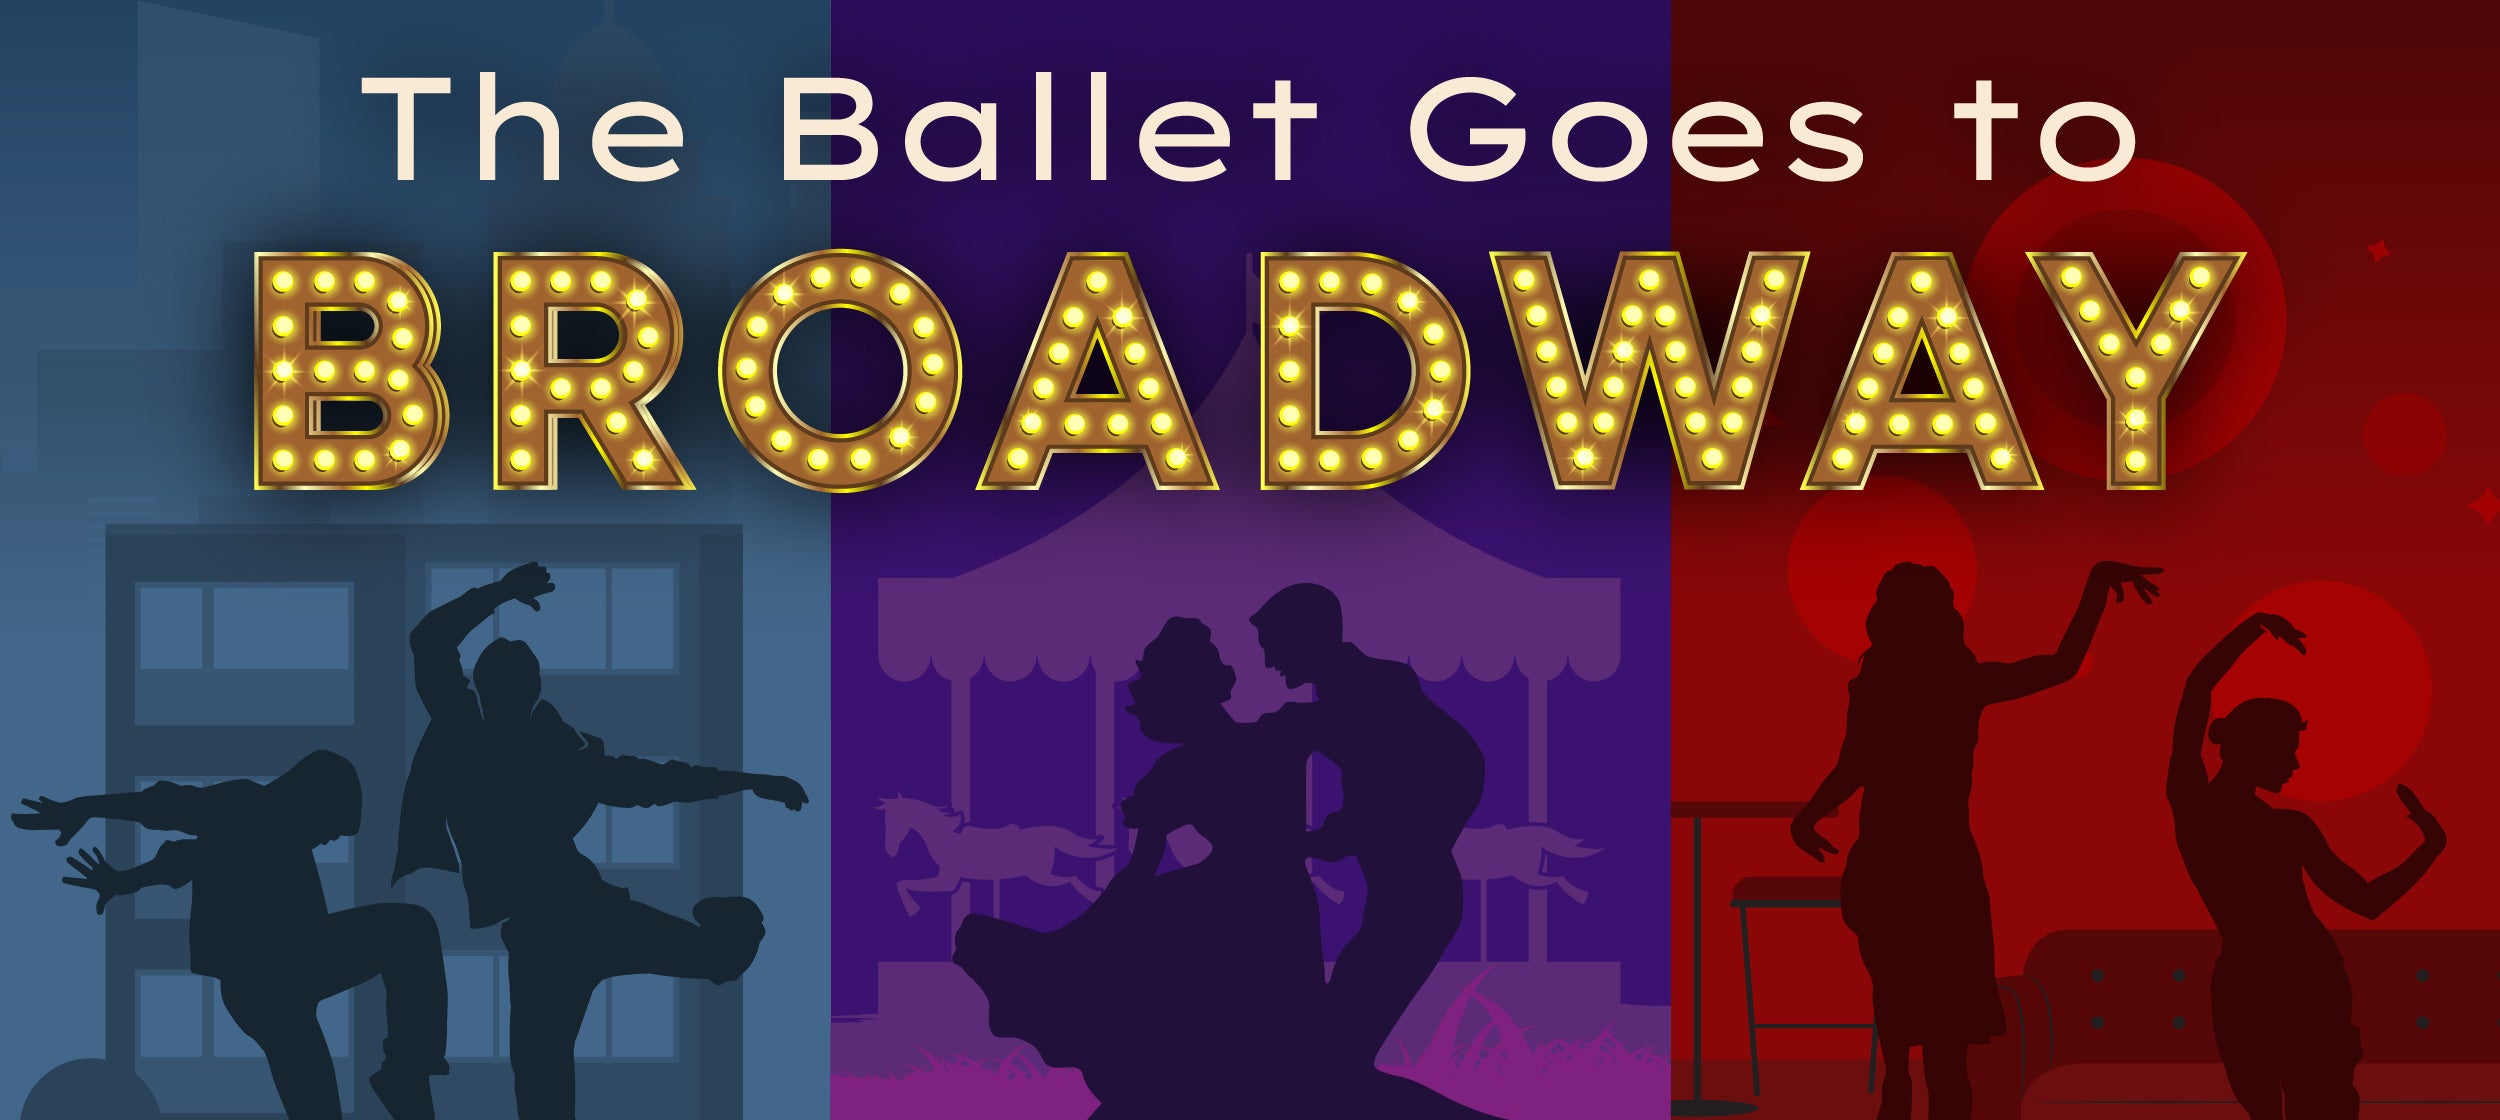 The Ballet Goes to Broadway